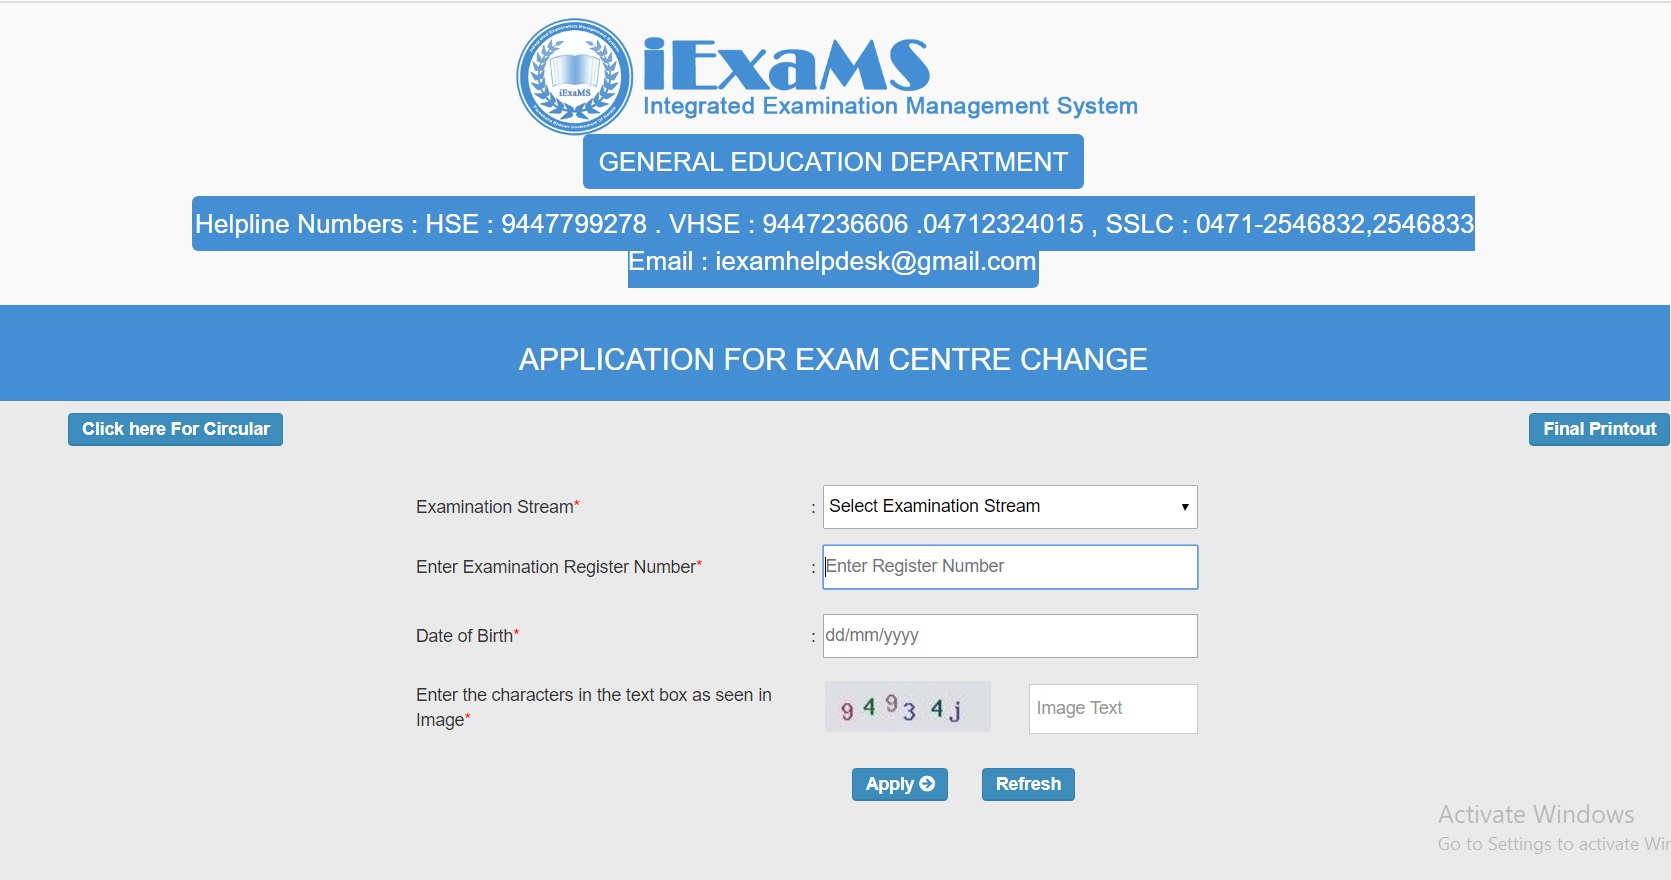 Application for Exam Centre Change